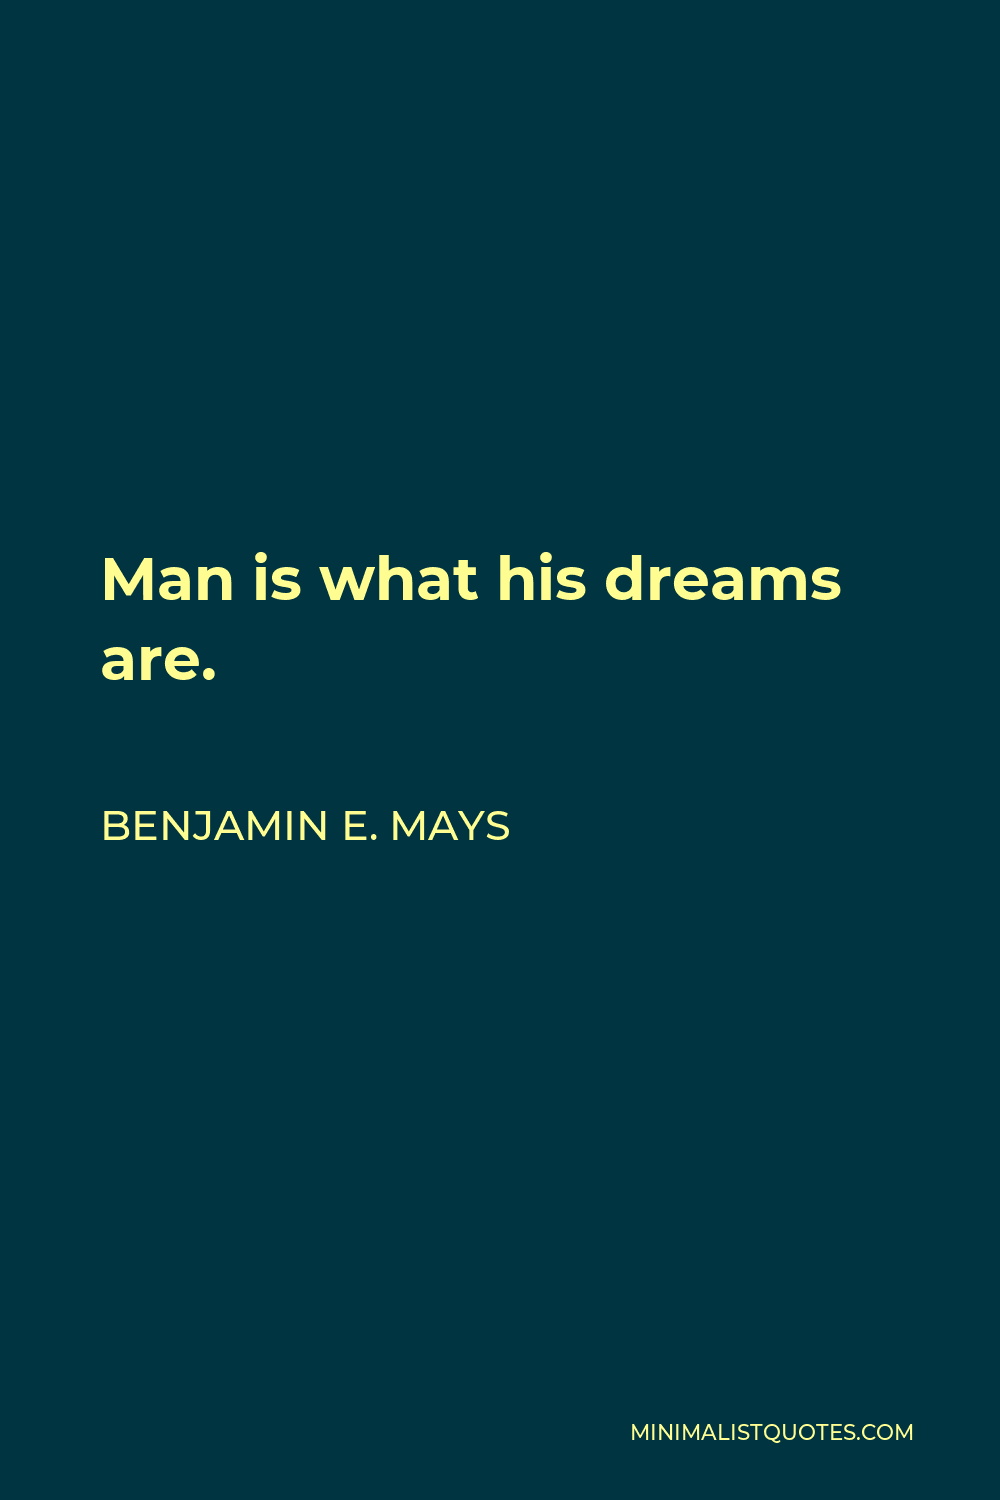 Benjamin E. Mays Quote - Man is what his dreams are.